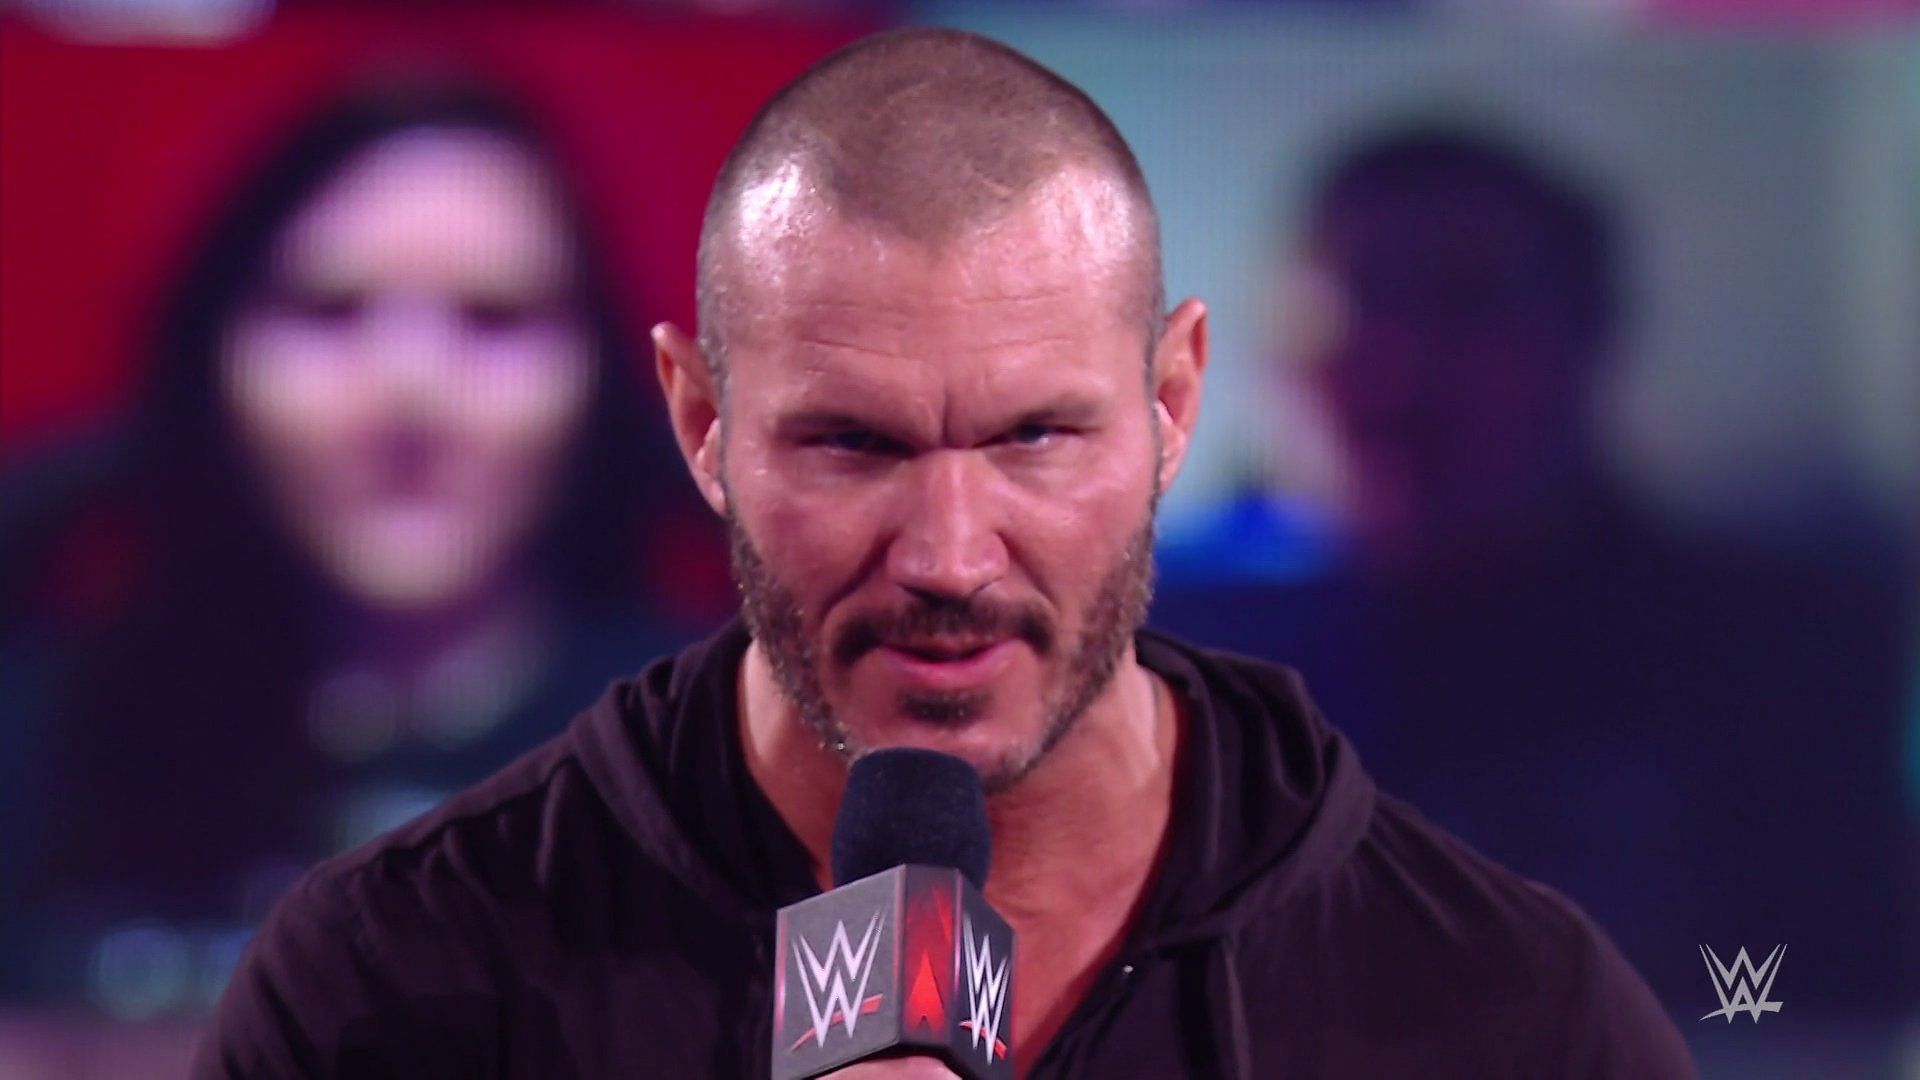 Randy Orton on similarities between him and Shawn Michaels